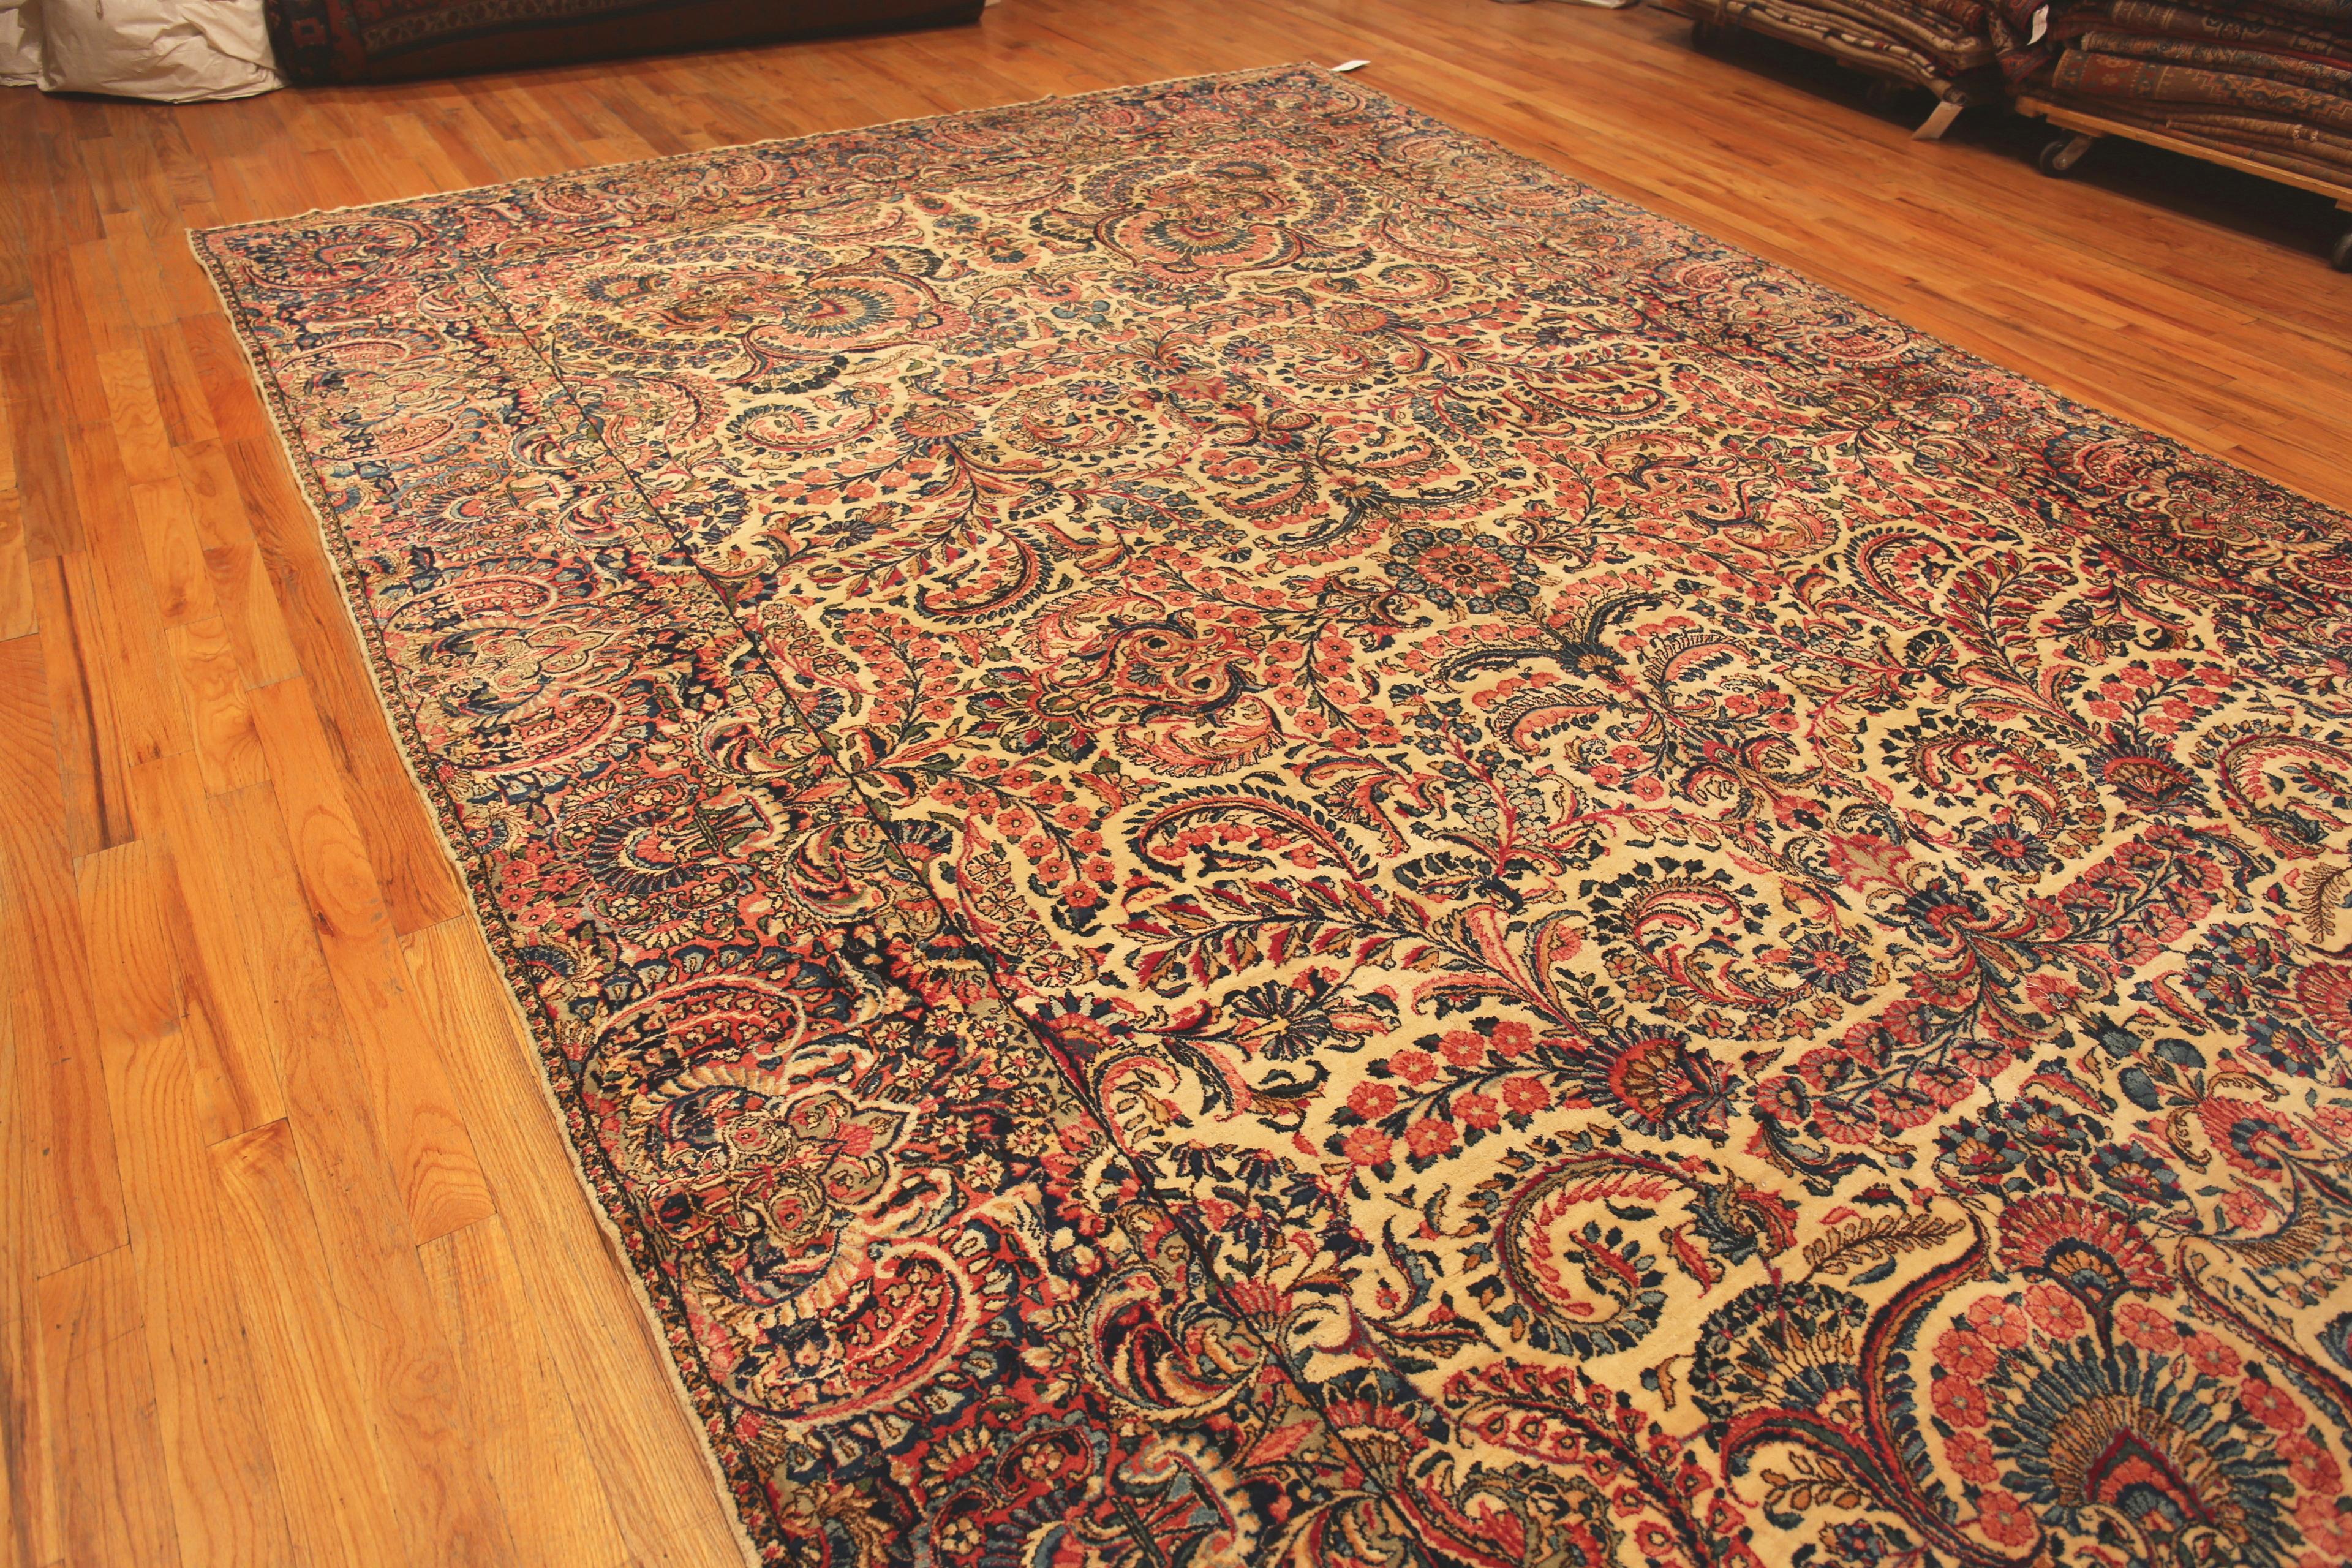 Large Antique Persian Kerman Floral Rug, Country of origin / rug type: Persian rug, Circa date: 1940. Size: 10 ft 9 in x 17 ft 6 in (3.28 m x 5.33 m)